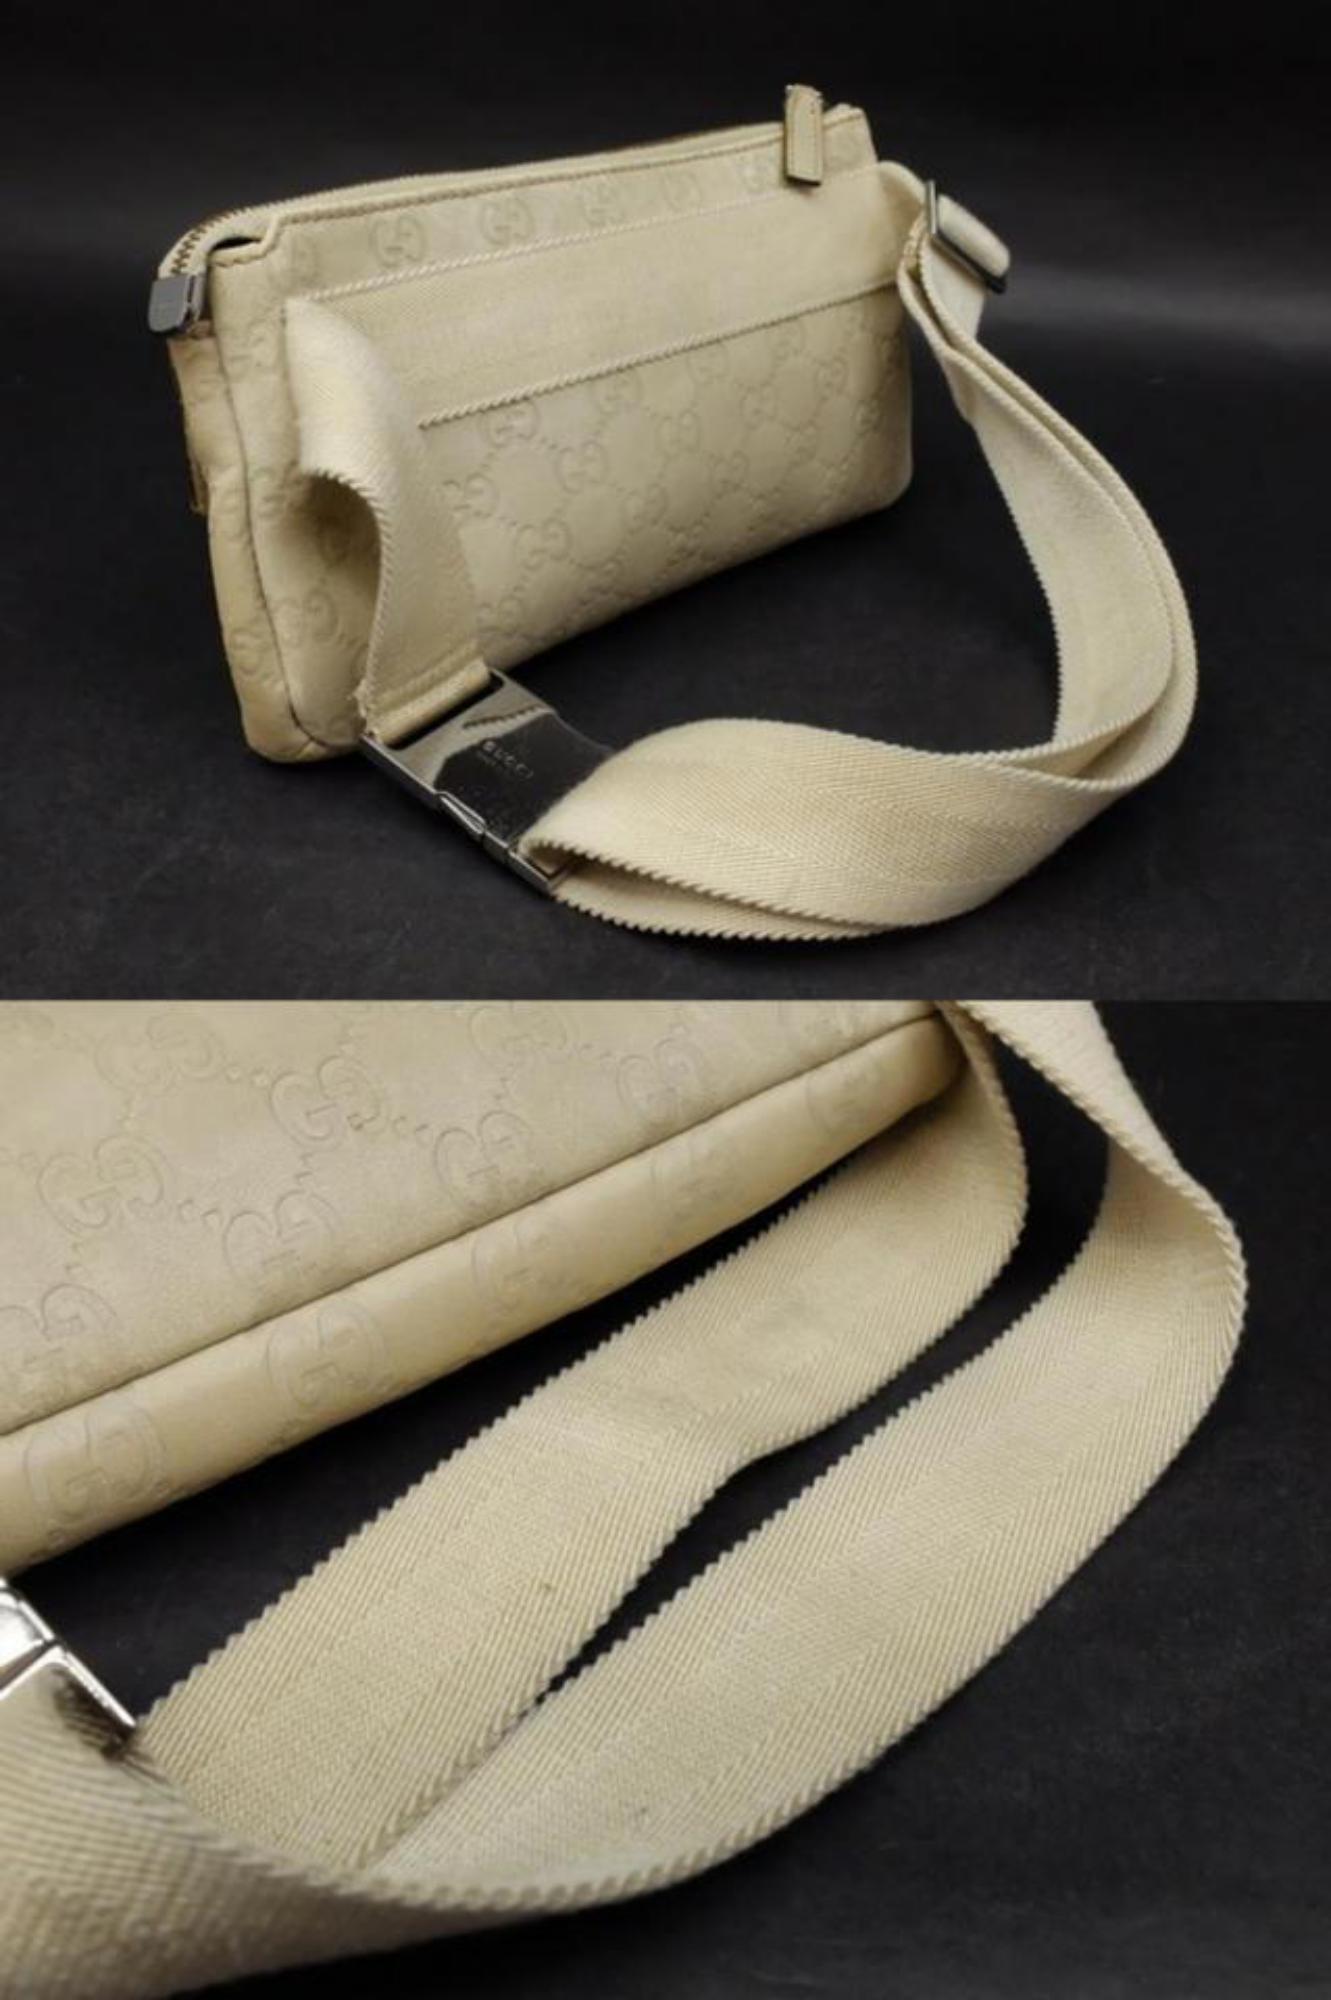 Gucci Guccissima Bum Fanny Pack Waist Pouch 232819 Beige Leather Cross Body Bag 3